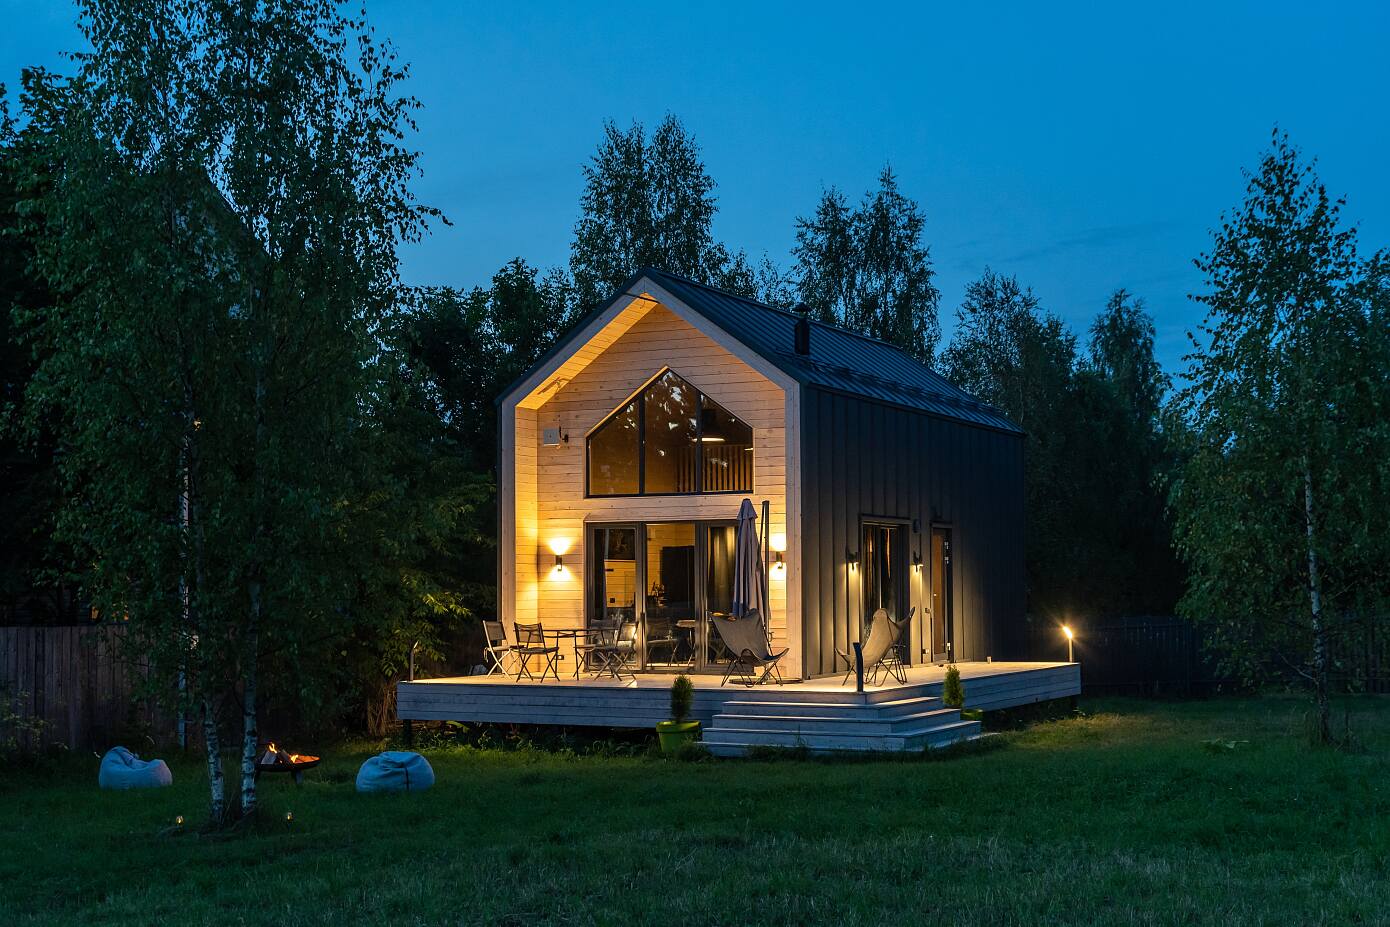 Architects’ Barnhouse by MNdesign